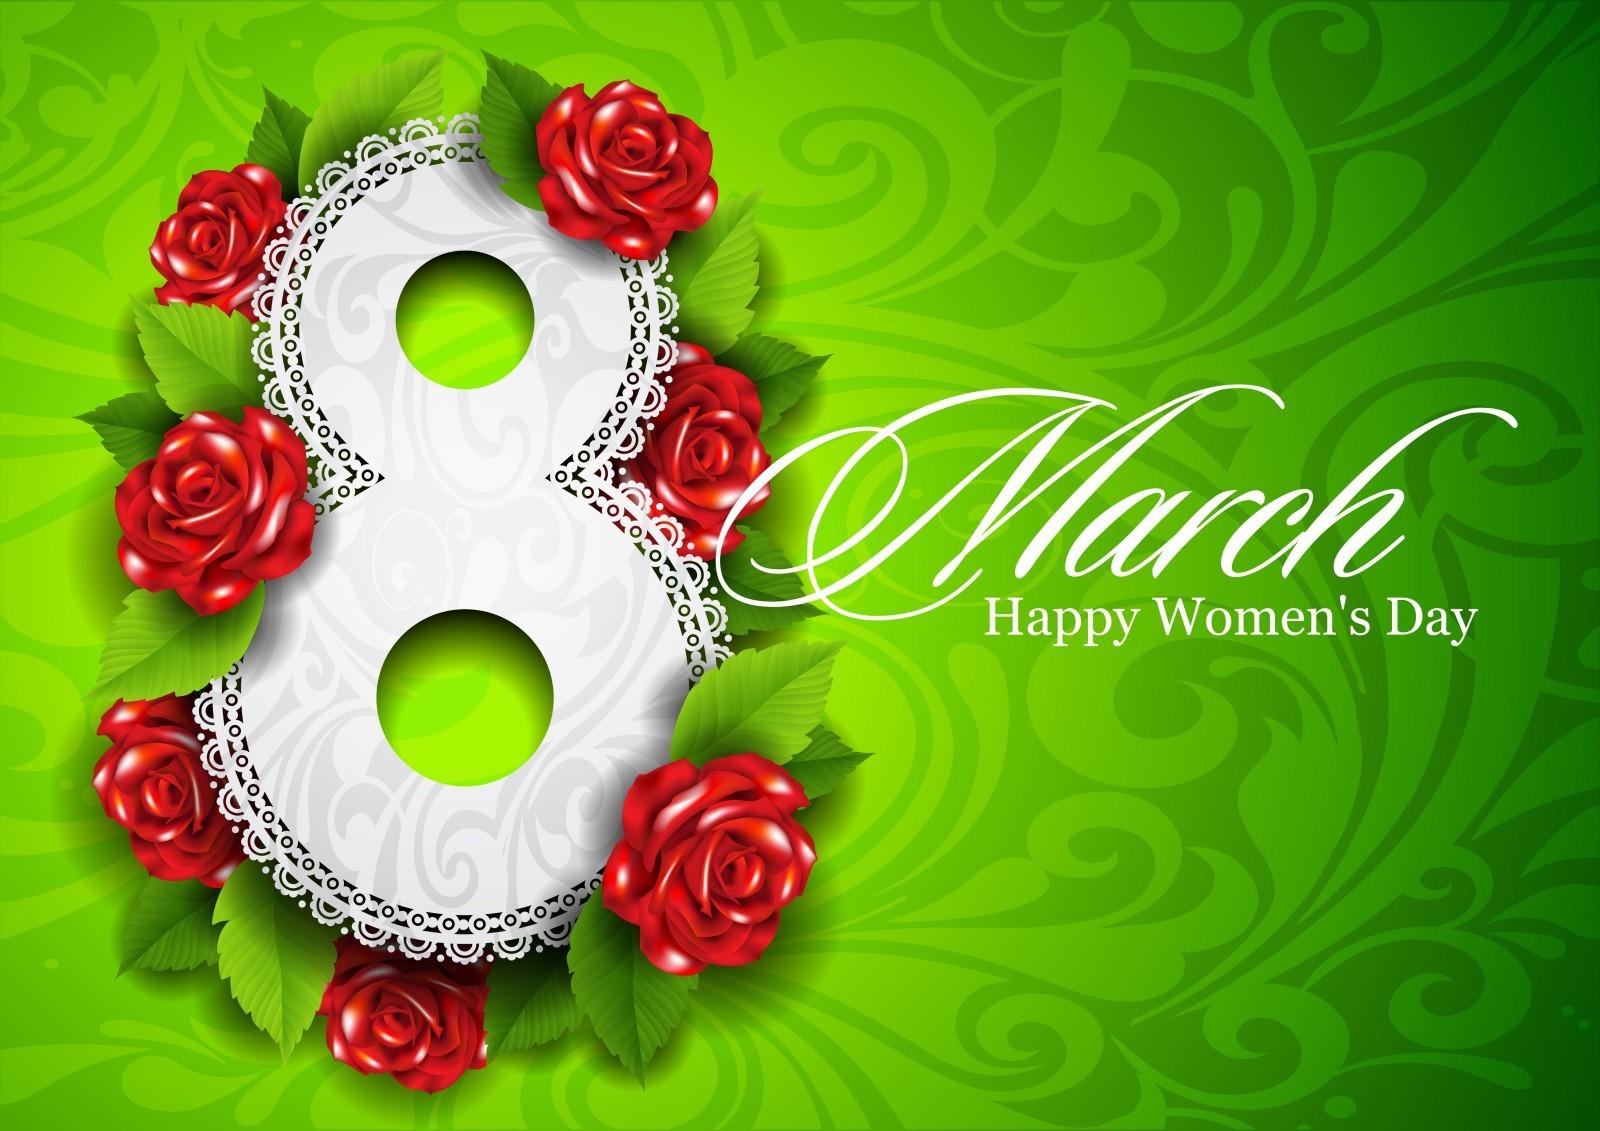 March Happy Womens Day Wallpaper High Definition Cool Colourful